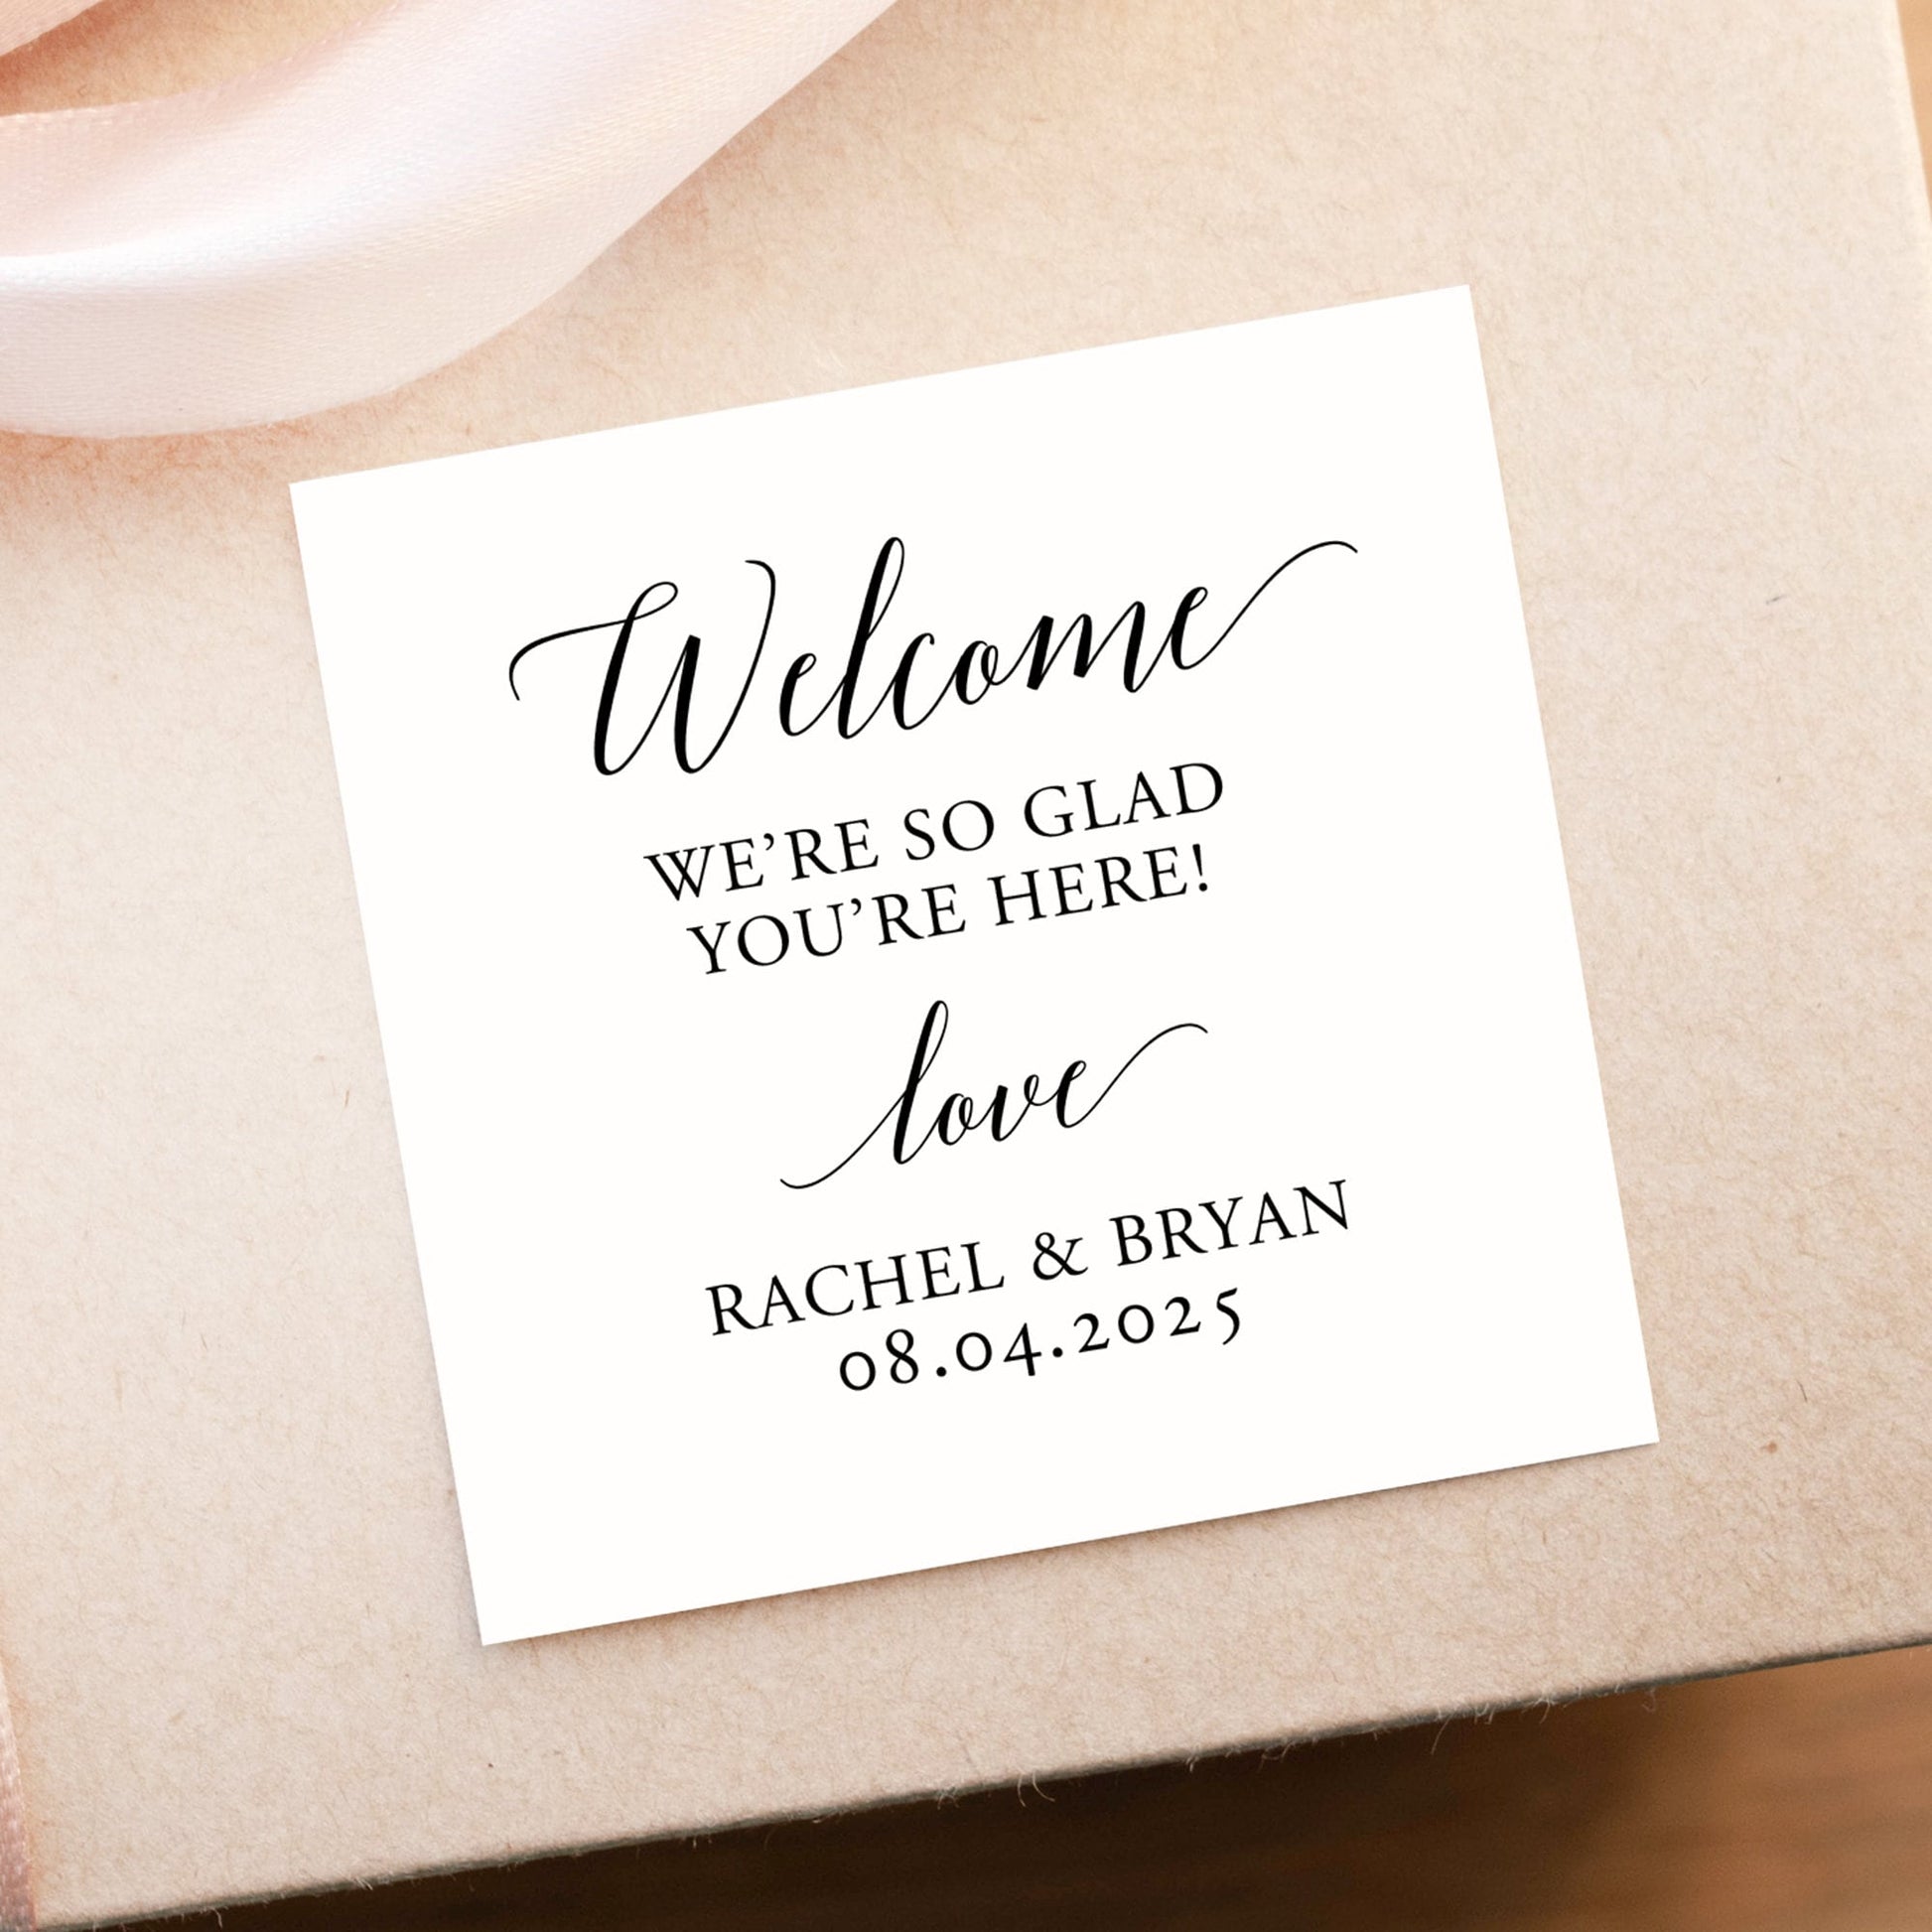 Wedding Stickers for Invitations: Do you really need them?